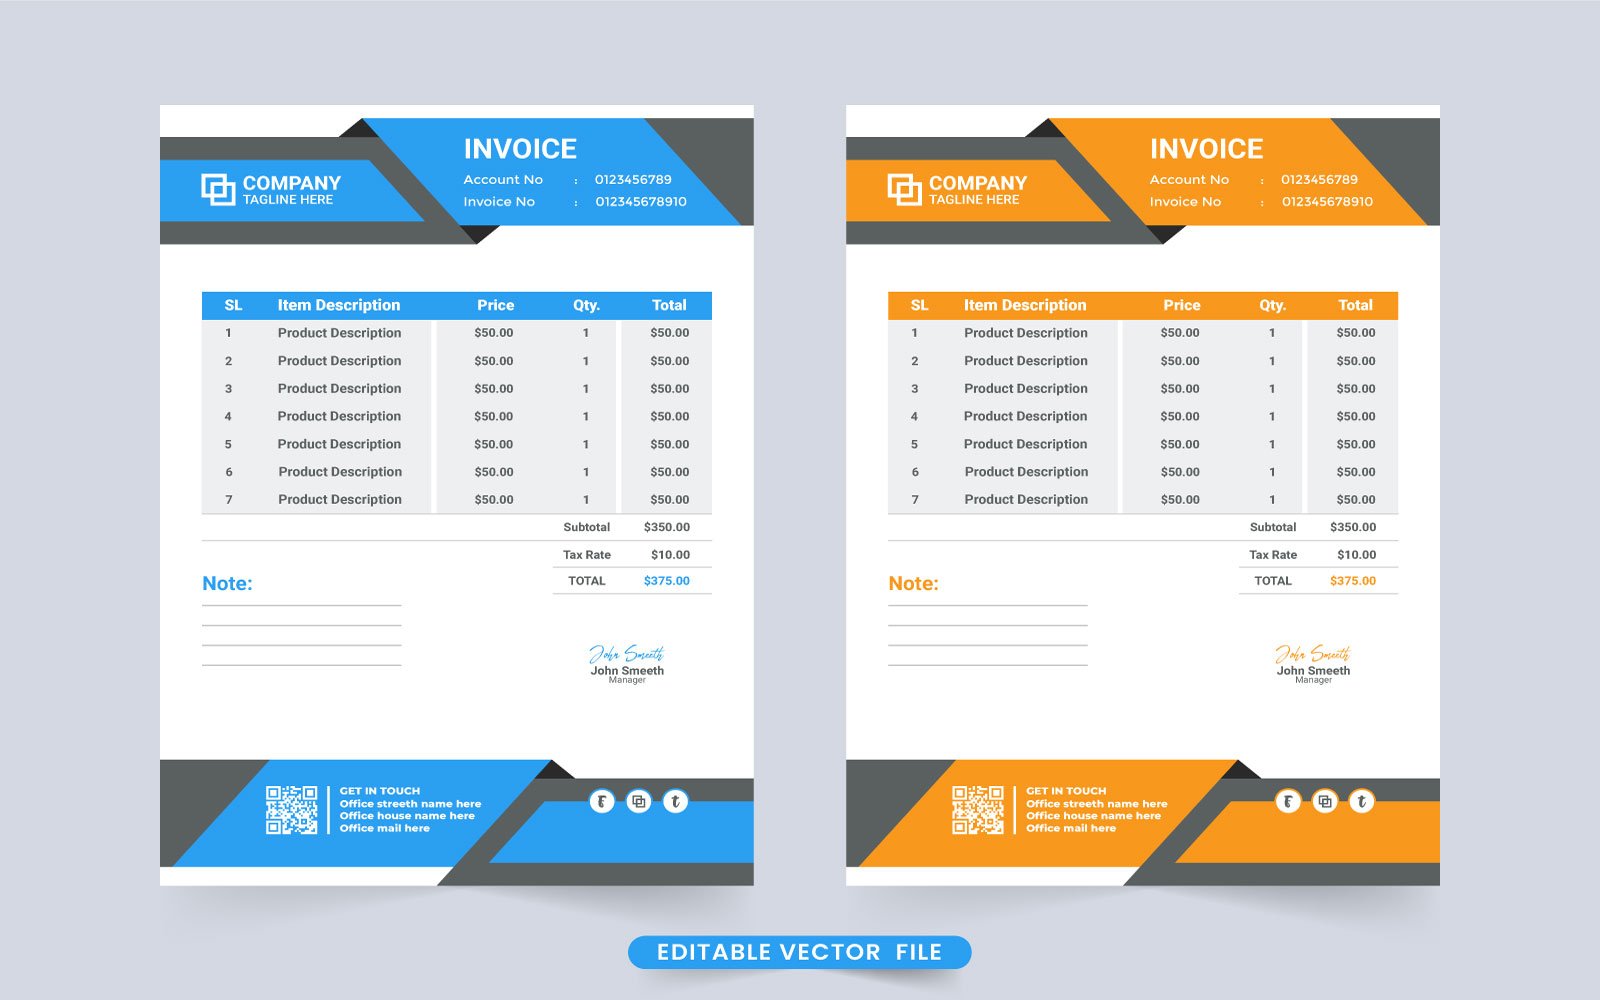 Template #272346 Invoice Template Webdesign Template - Logo template Preview